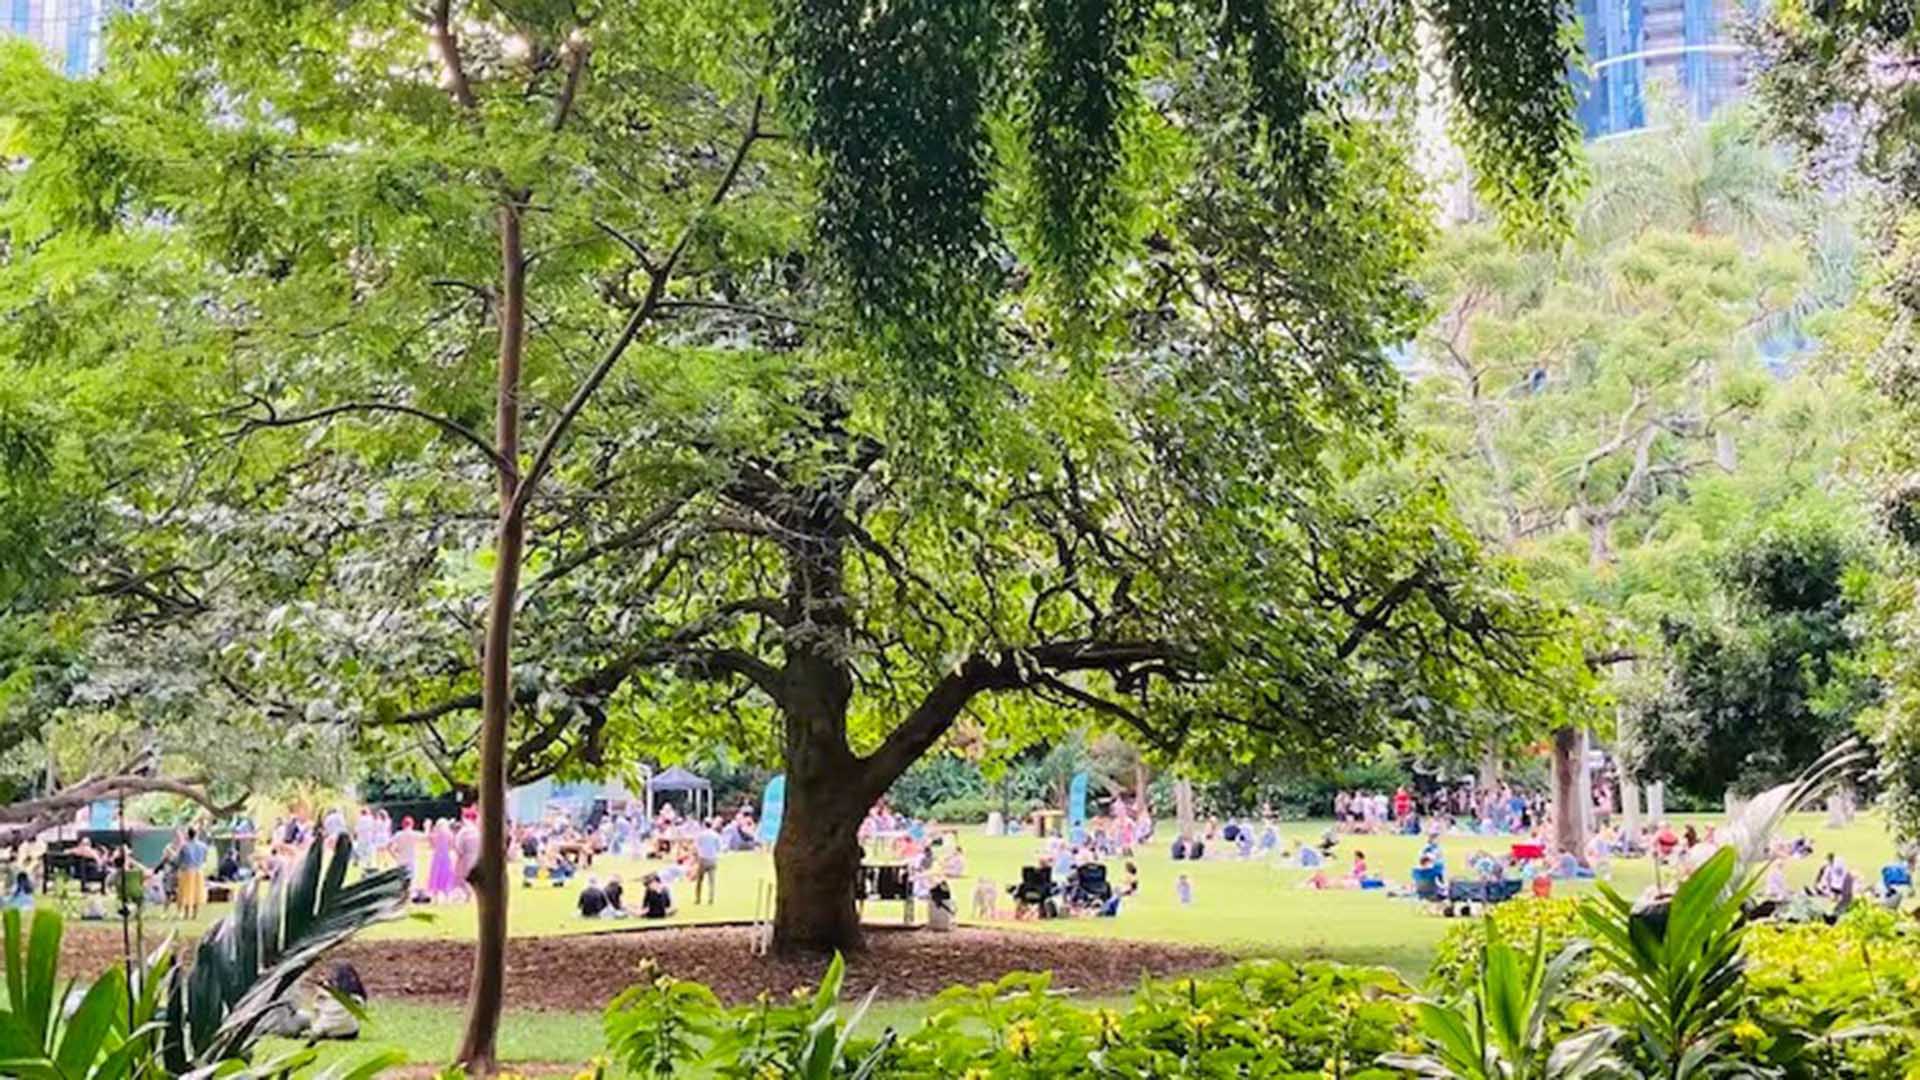 Lots of groups of people enjoying a sunny day in a tree-lined city park.